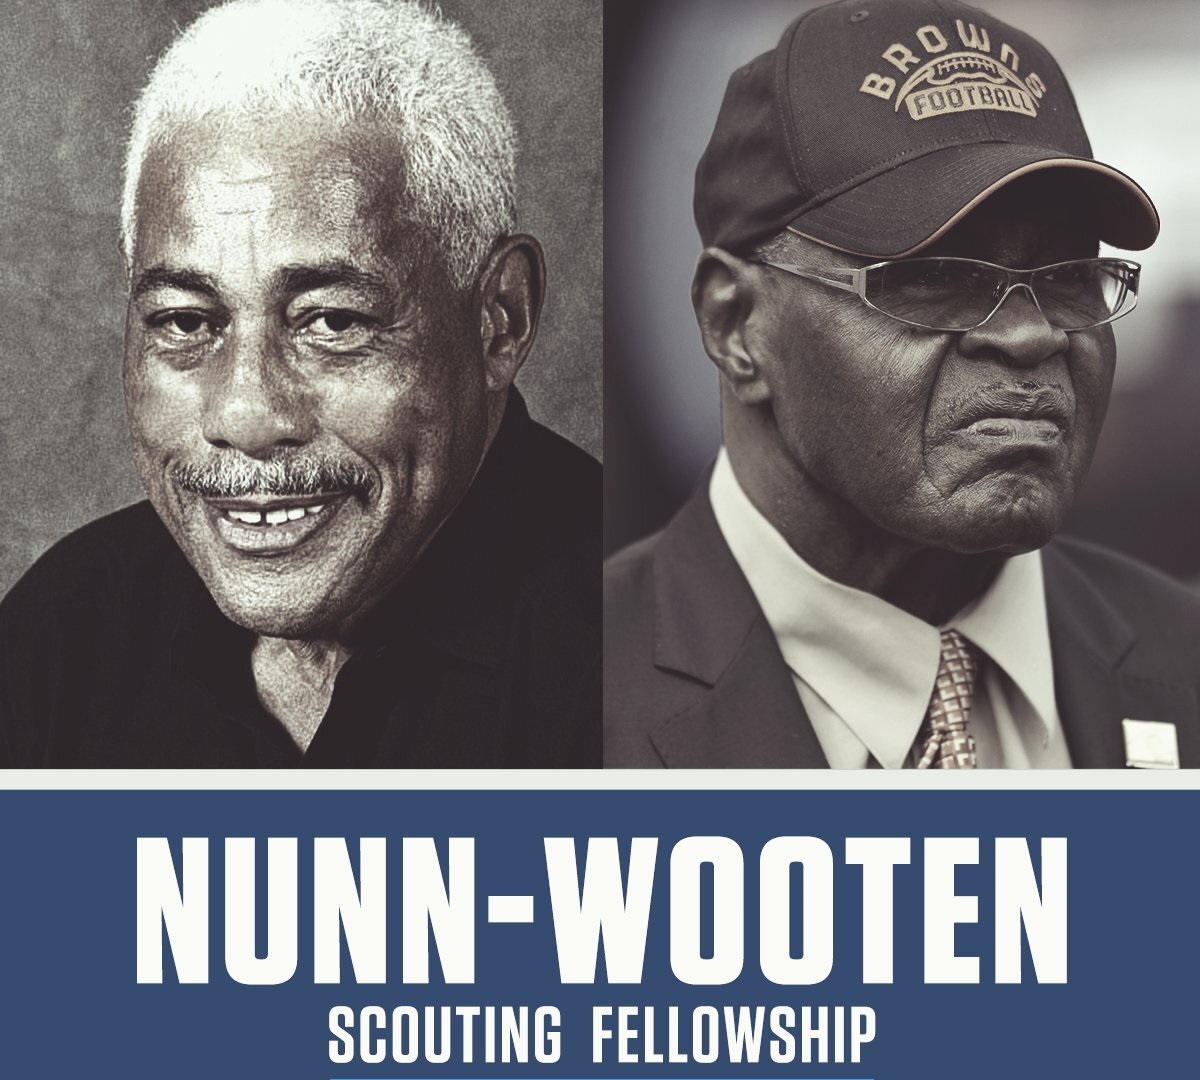 The @NFL’s Nunn-Wooten Scouting Fellowship provides interested and qualified candidates exposure to a career in professional scouting. Learn more about the fellowship and apply by June 14: ops.nfl.com/2OkIKIE